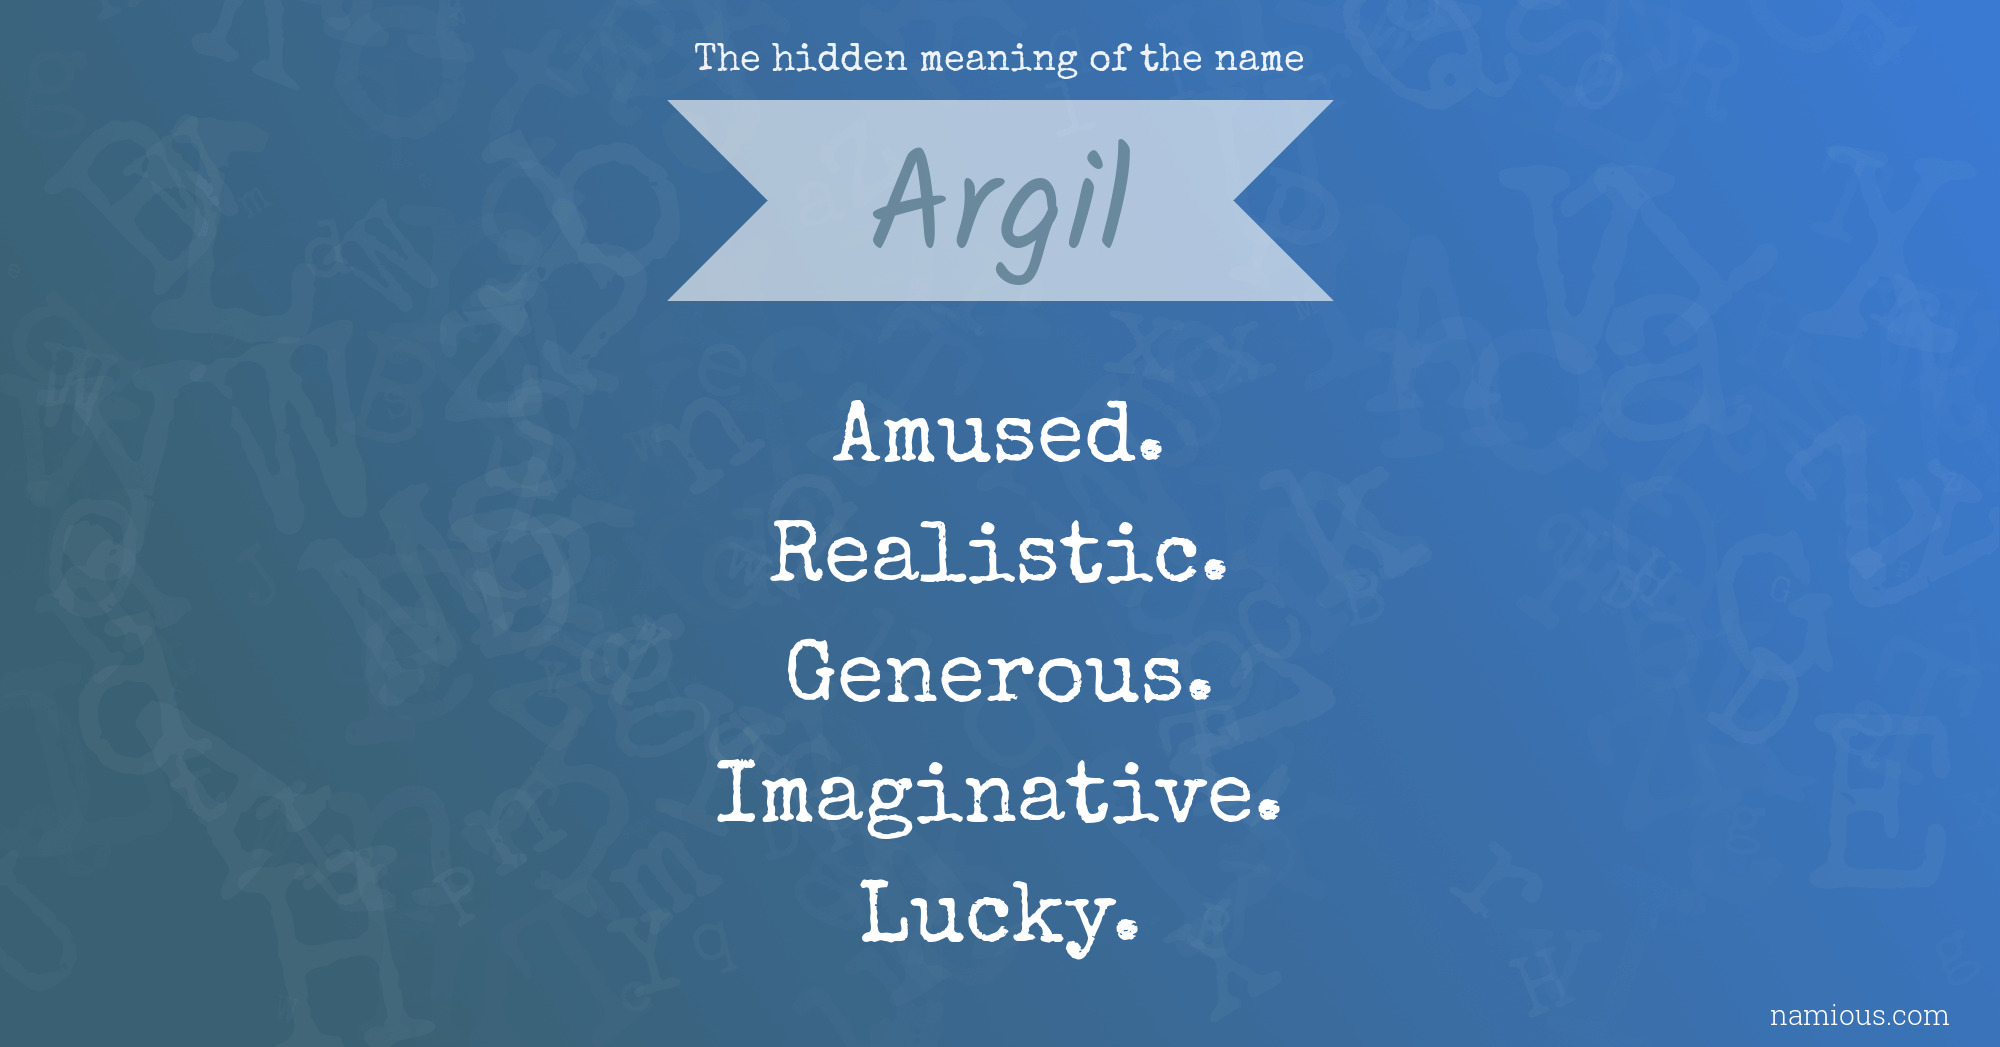 The hidden meaning of the name Argil